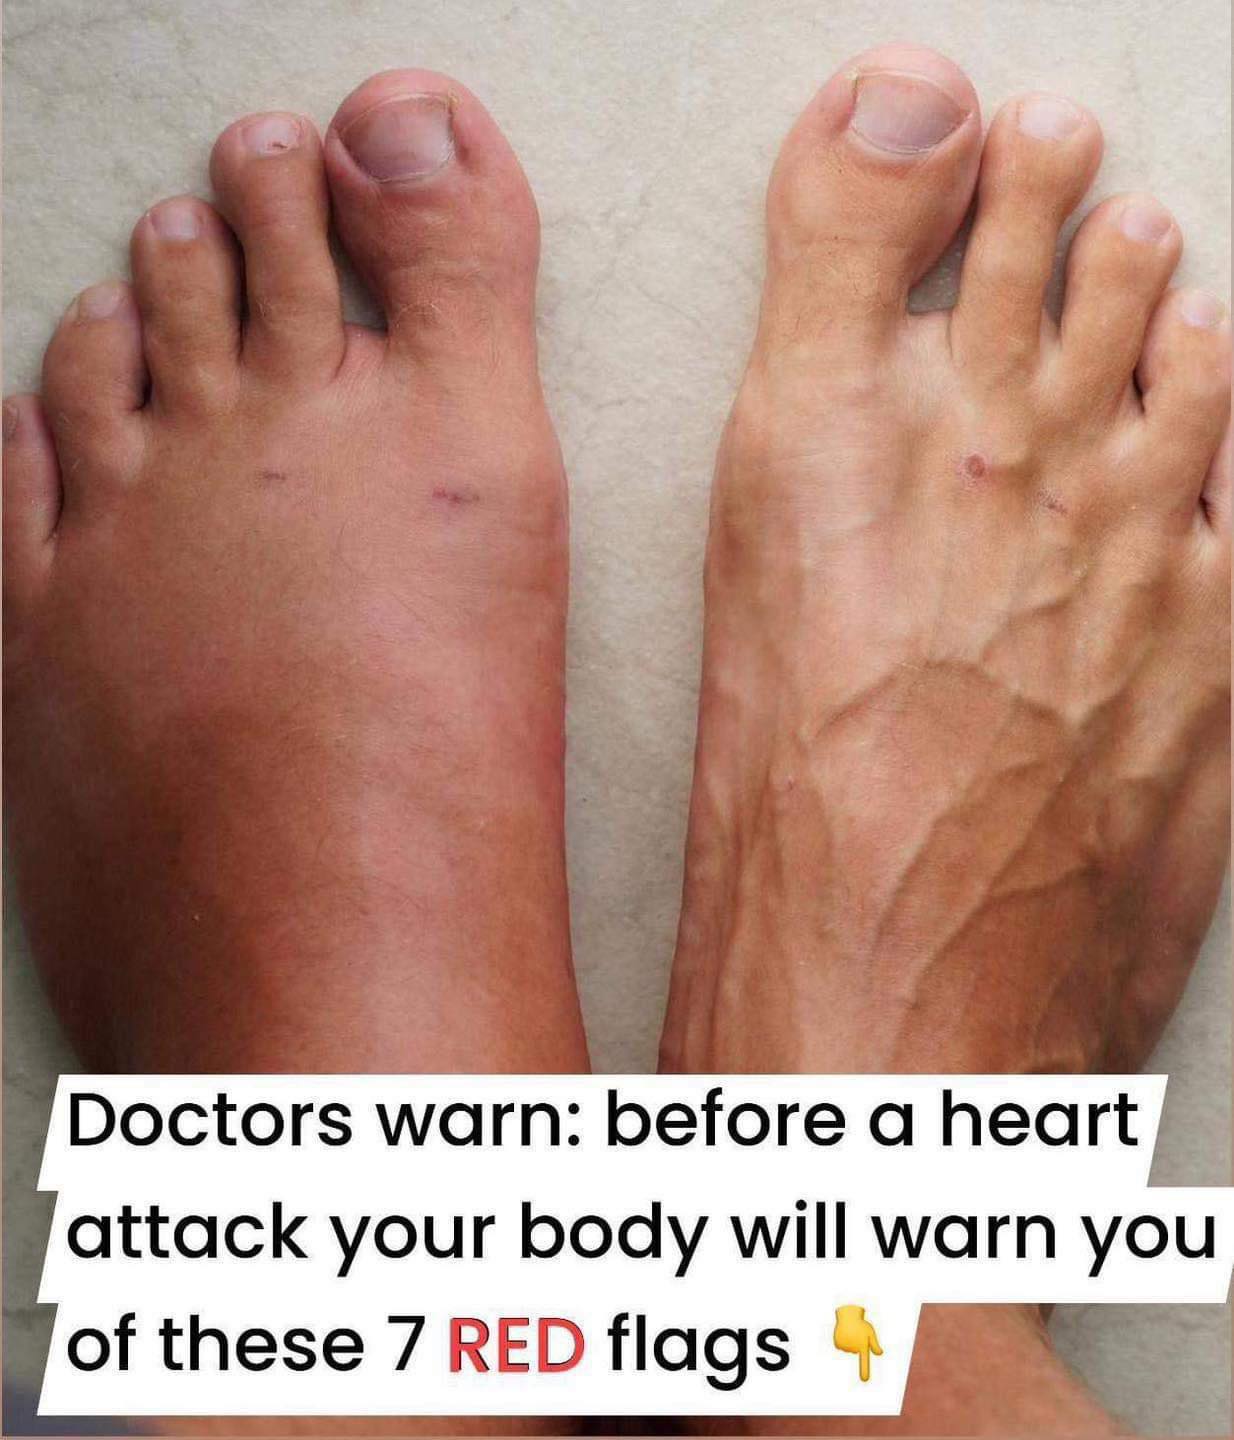 A month before a heart attack, your body will warn you of these 7 signs